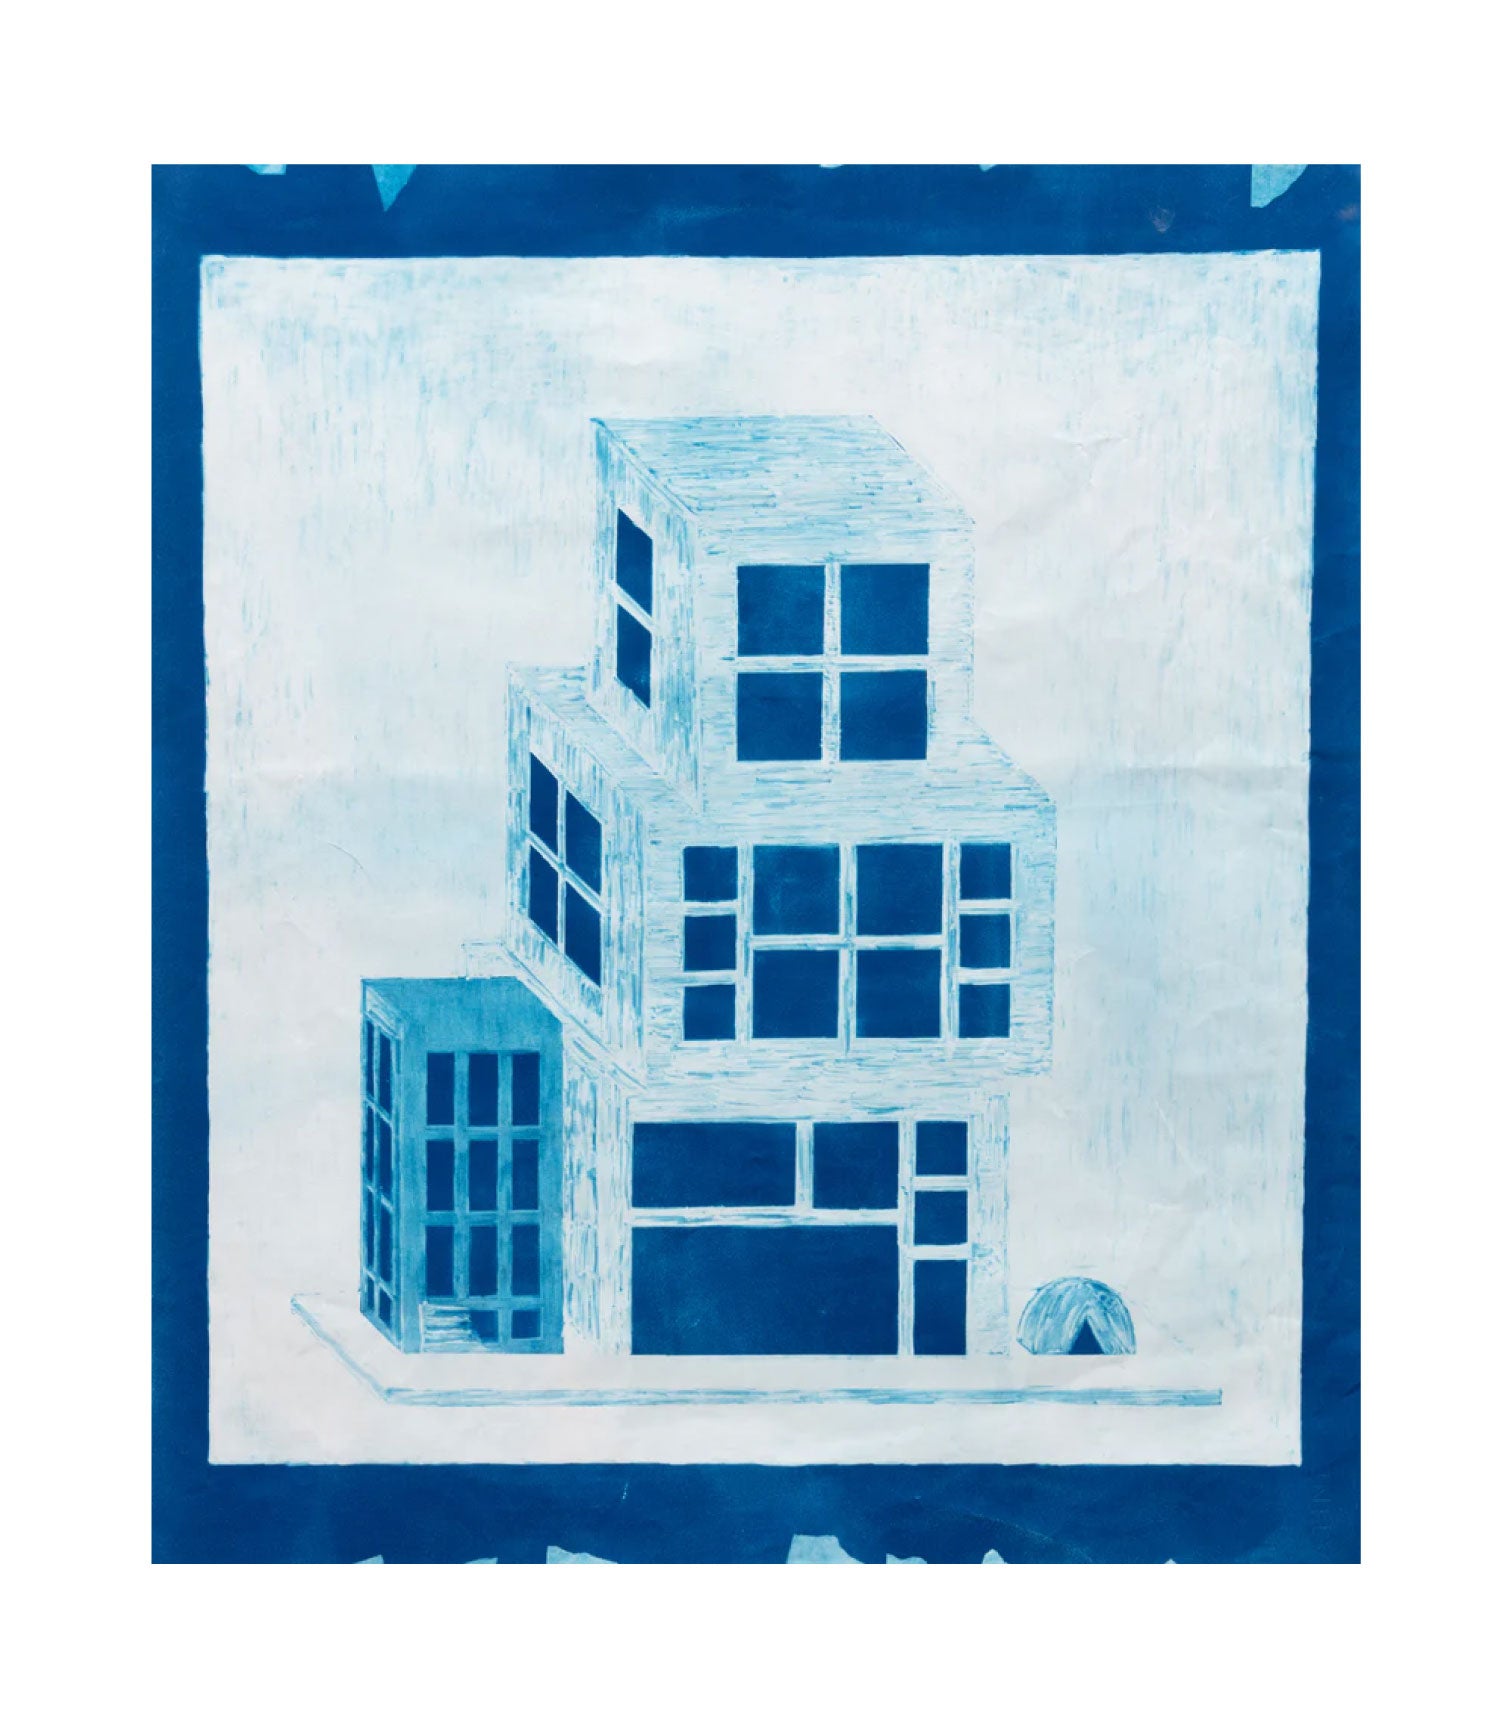 'CAPITAL CITY (COVER)' - Cyanotype on Paper